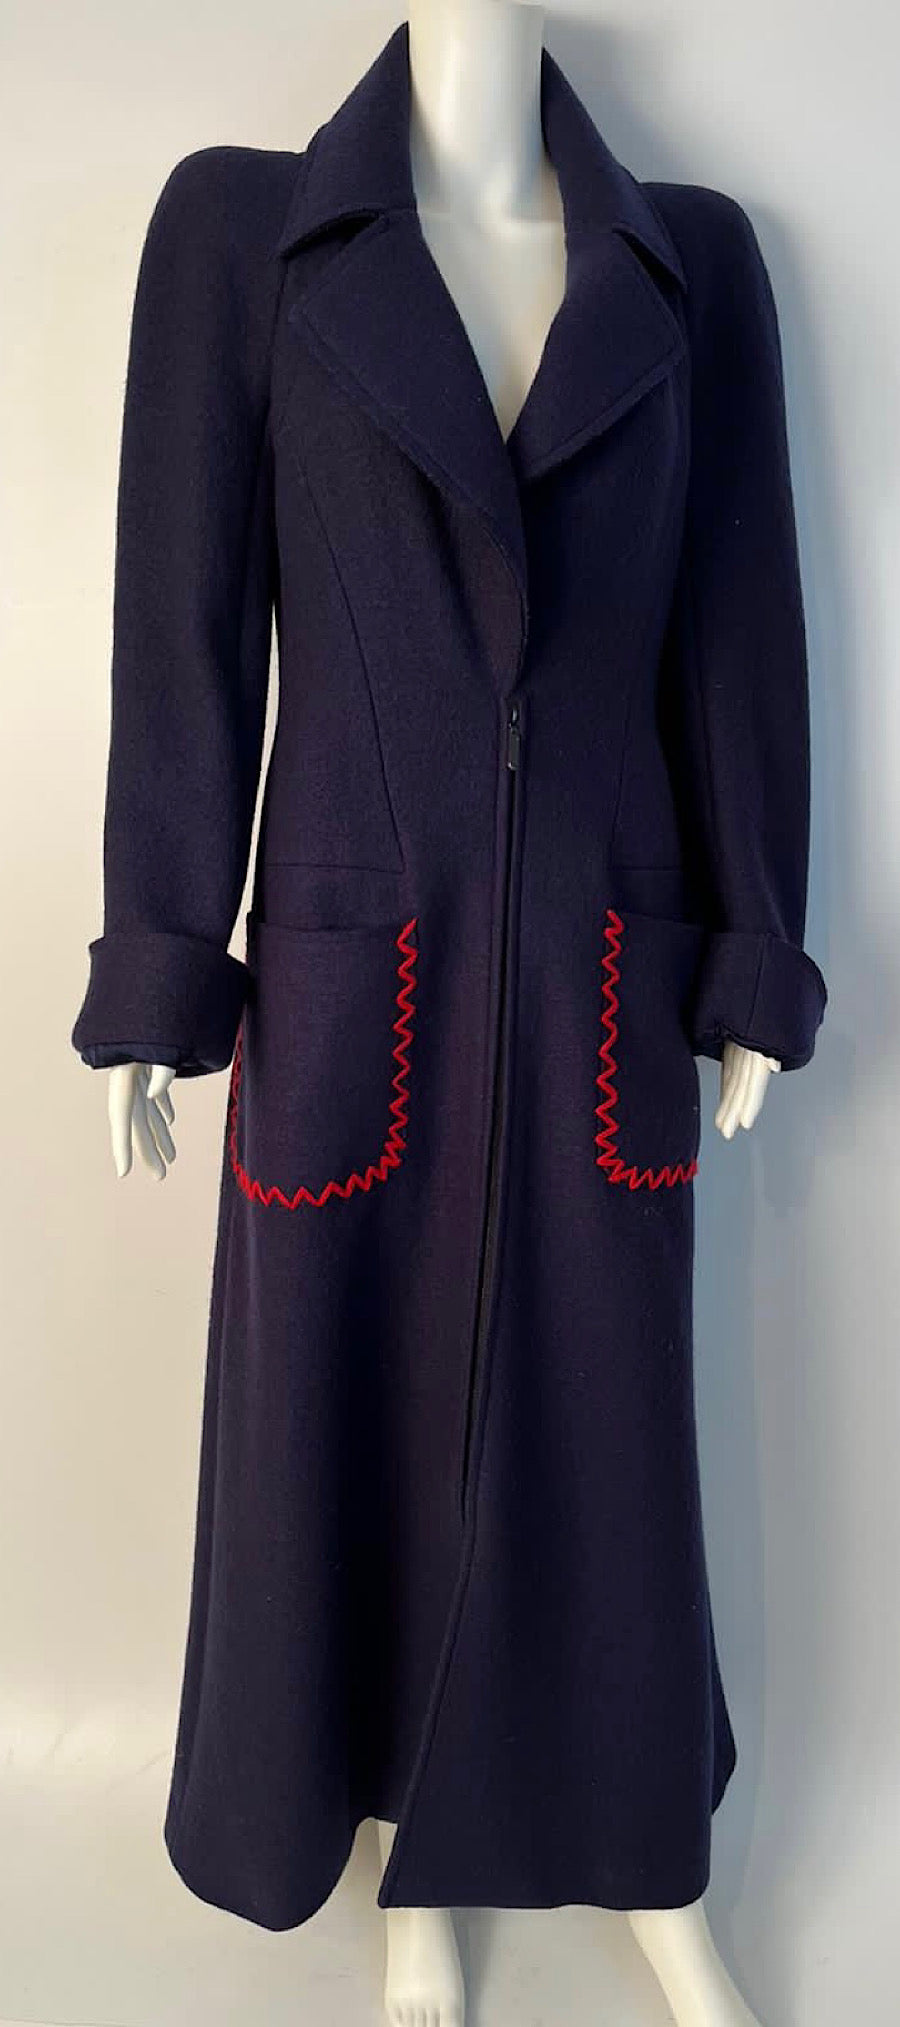 Chanel - Authenticated Coat - Wool Navy Plain for Women, Very Good Condition